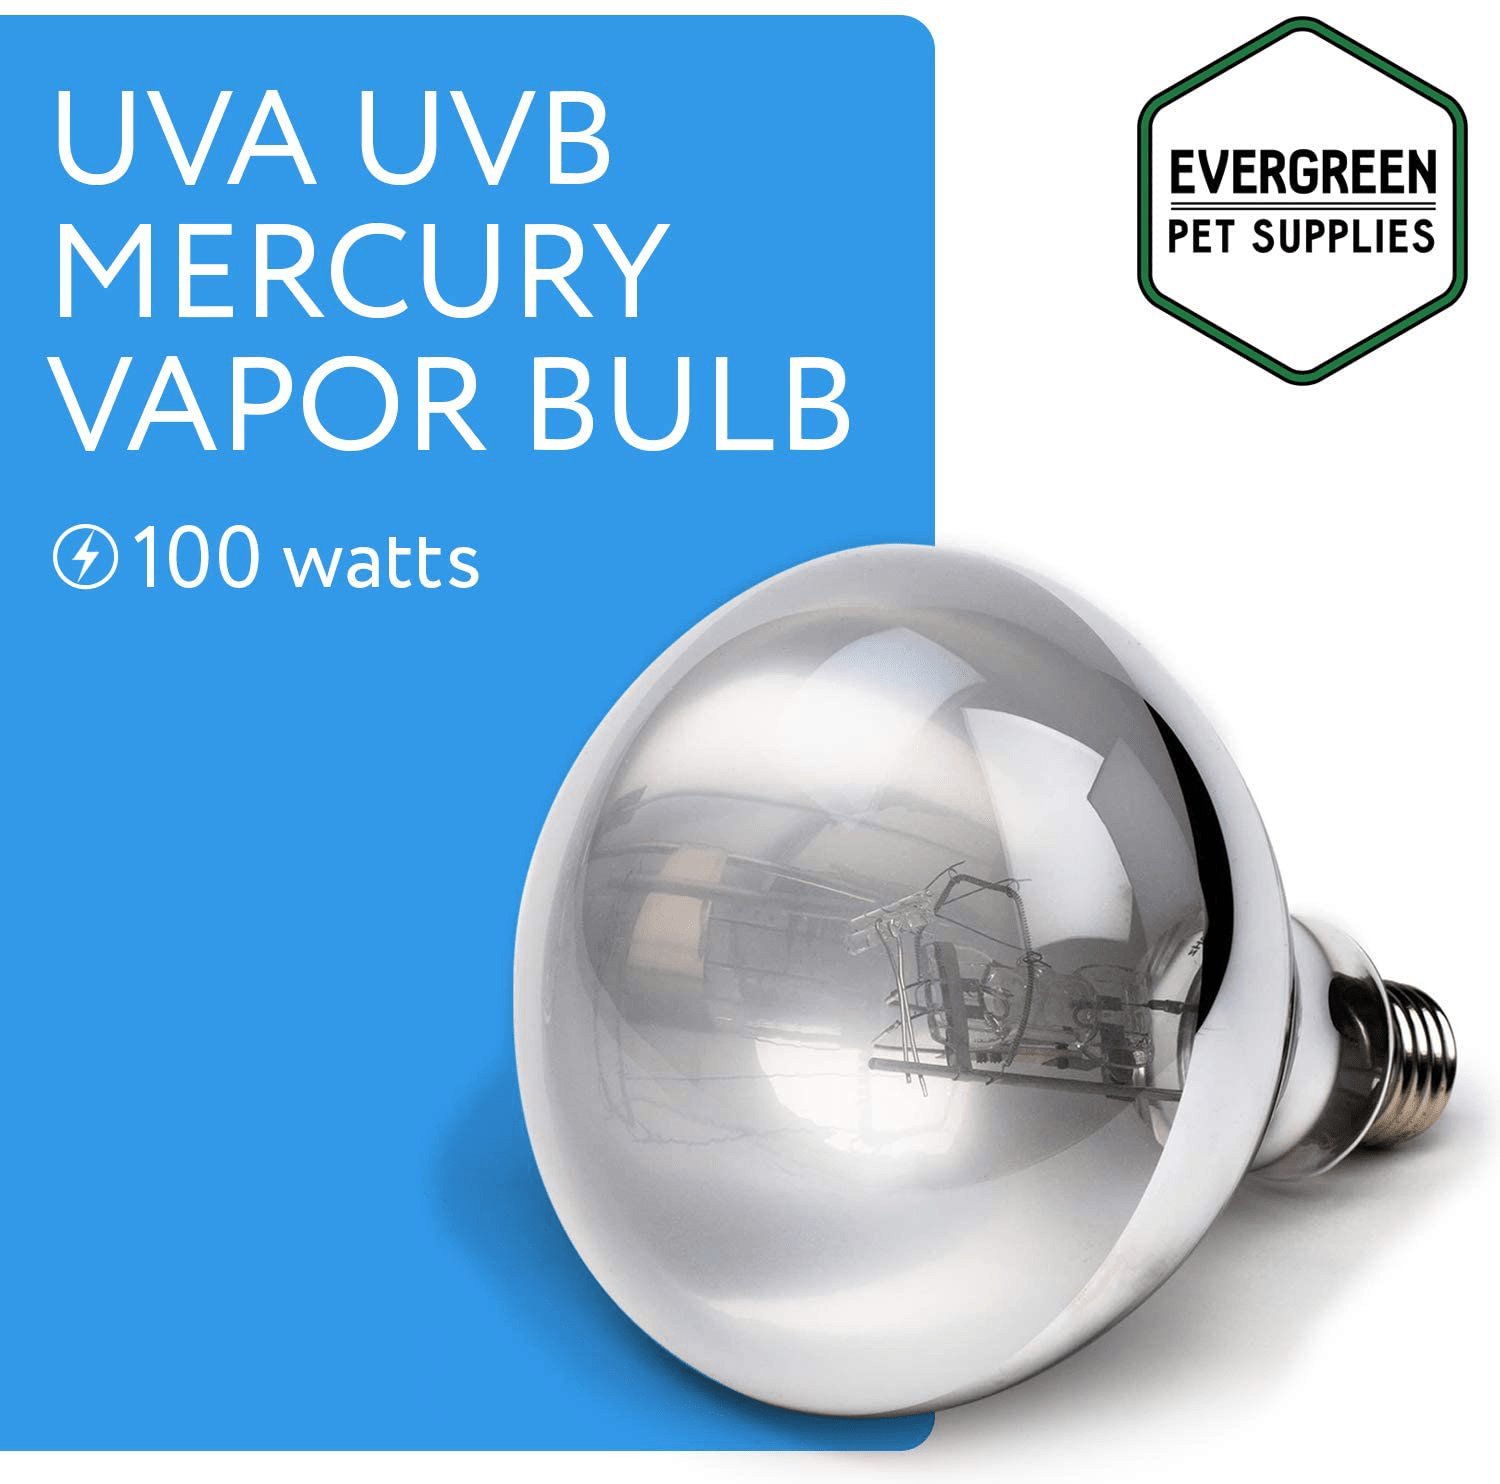 100 Watt UVA UVB Mercury Vapor Bulb / Light / Lamp for Reptile and Amphibian Use - Excellent Source of Heat and Light for UV and Basking - by Evergreen Pet Supplies Animals & Pet Supplies > Pet Supplies > Reptile & Amphibian Supplies > Reptile & Amphibian Substrates Evergreen Pet Supplies   